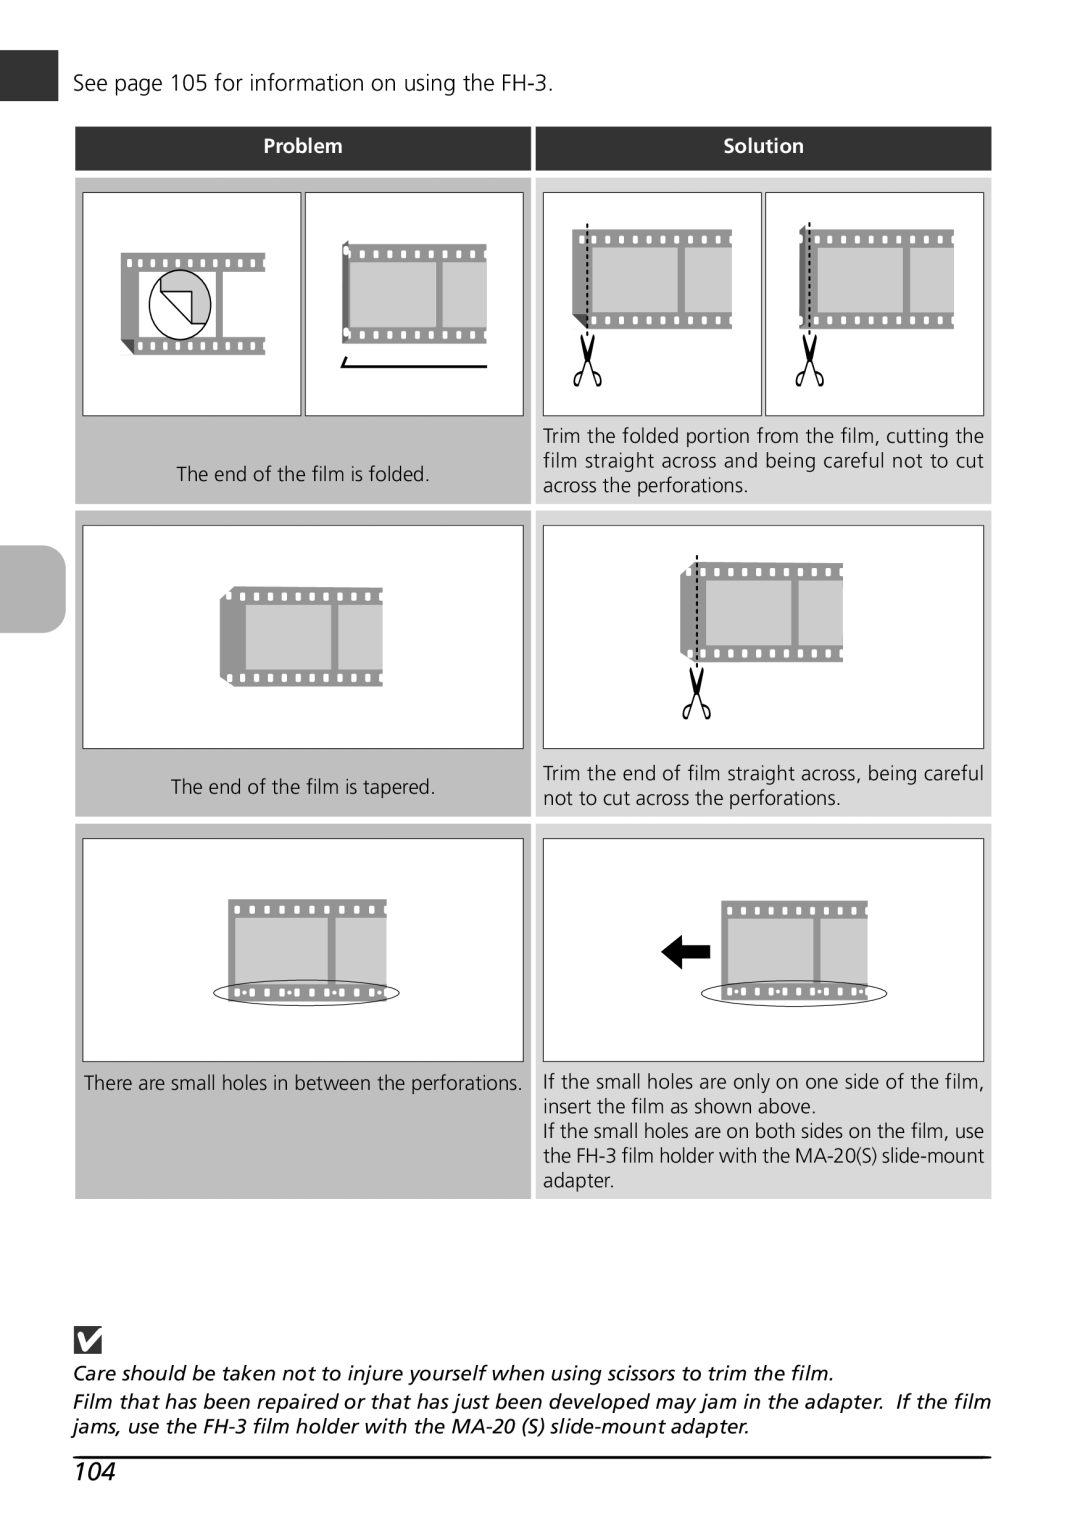 Nikon LS4000 user manual See page 105 for information on using the FH-3, Problem, Solution 